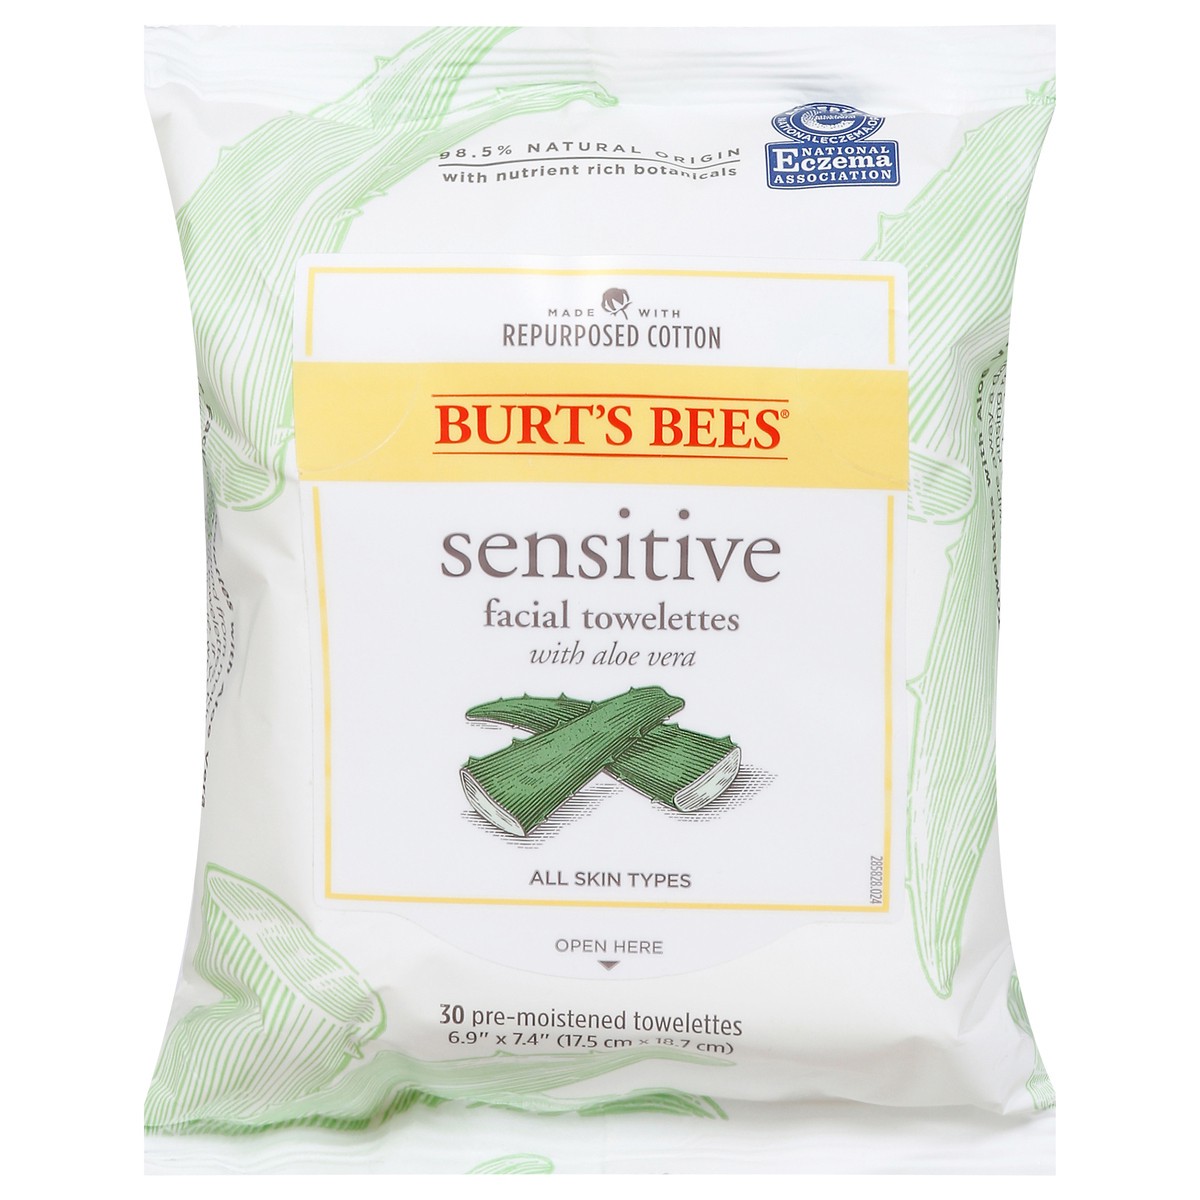 slide 1 of 137, Burt's Bees Soothing Facial Cleanser and Makeup Remover Towelettes with Aloe Vera for Sensitive Skin, Made with Upcycled Cotton, 30 Count, 30 ct